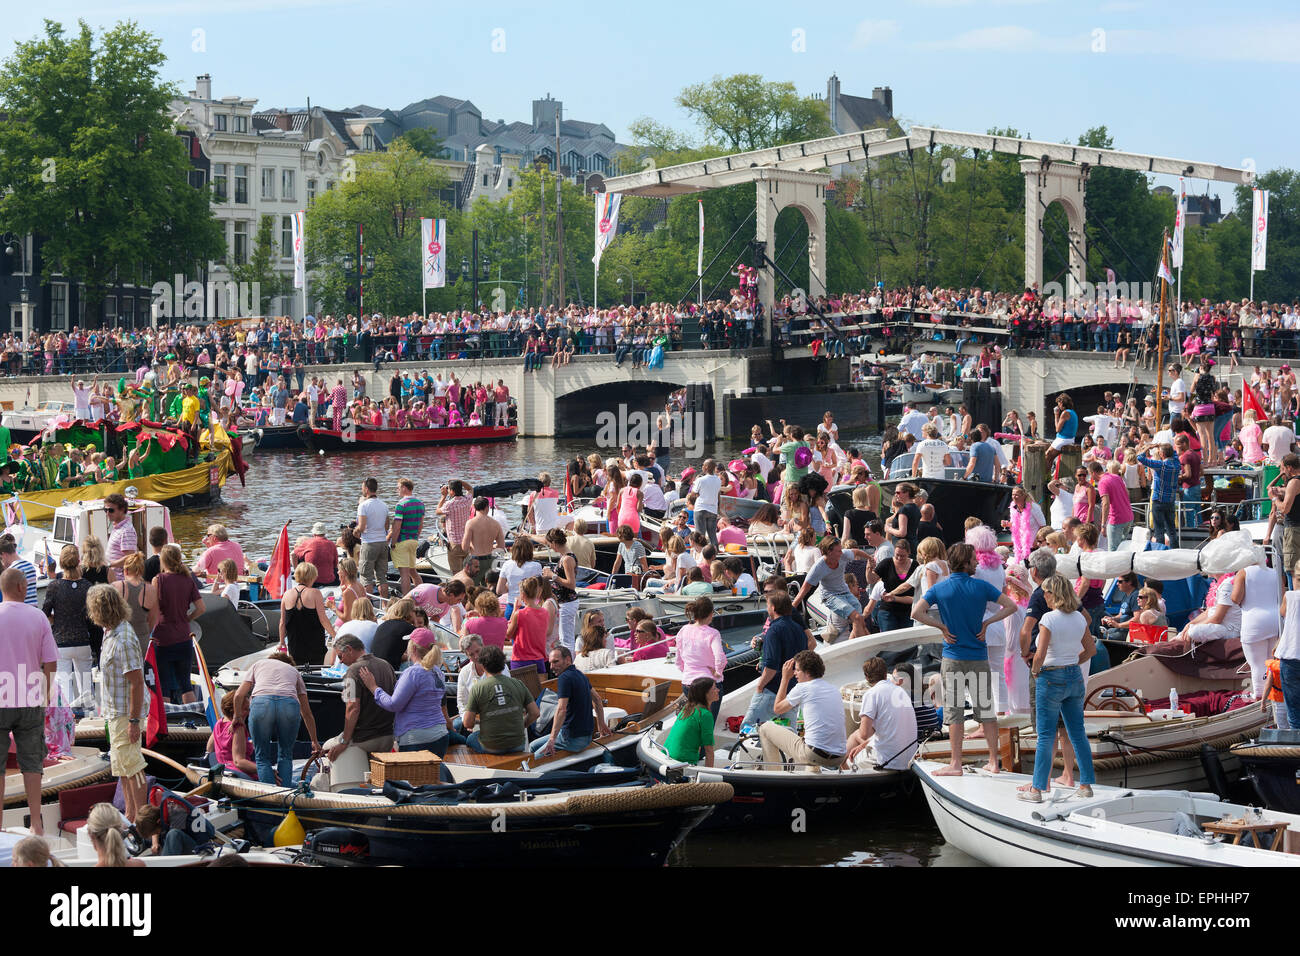 Amsterdam Gay Pride Canal Parade am Magere Brug oder Magere Brücke am Fluss Amstel Stockfoto